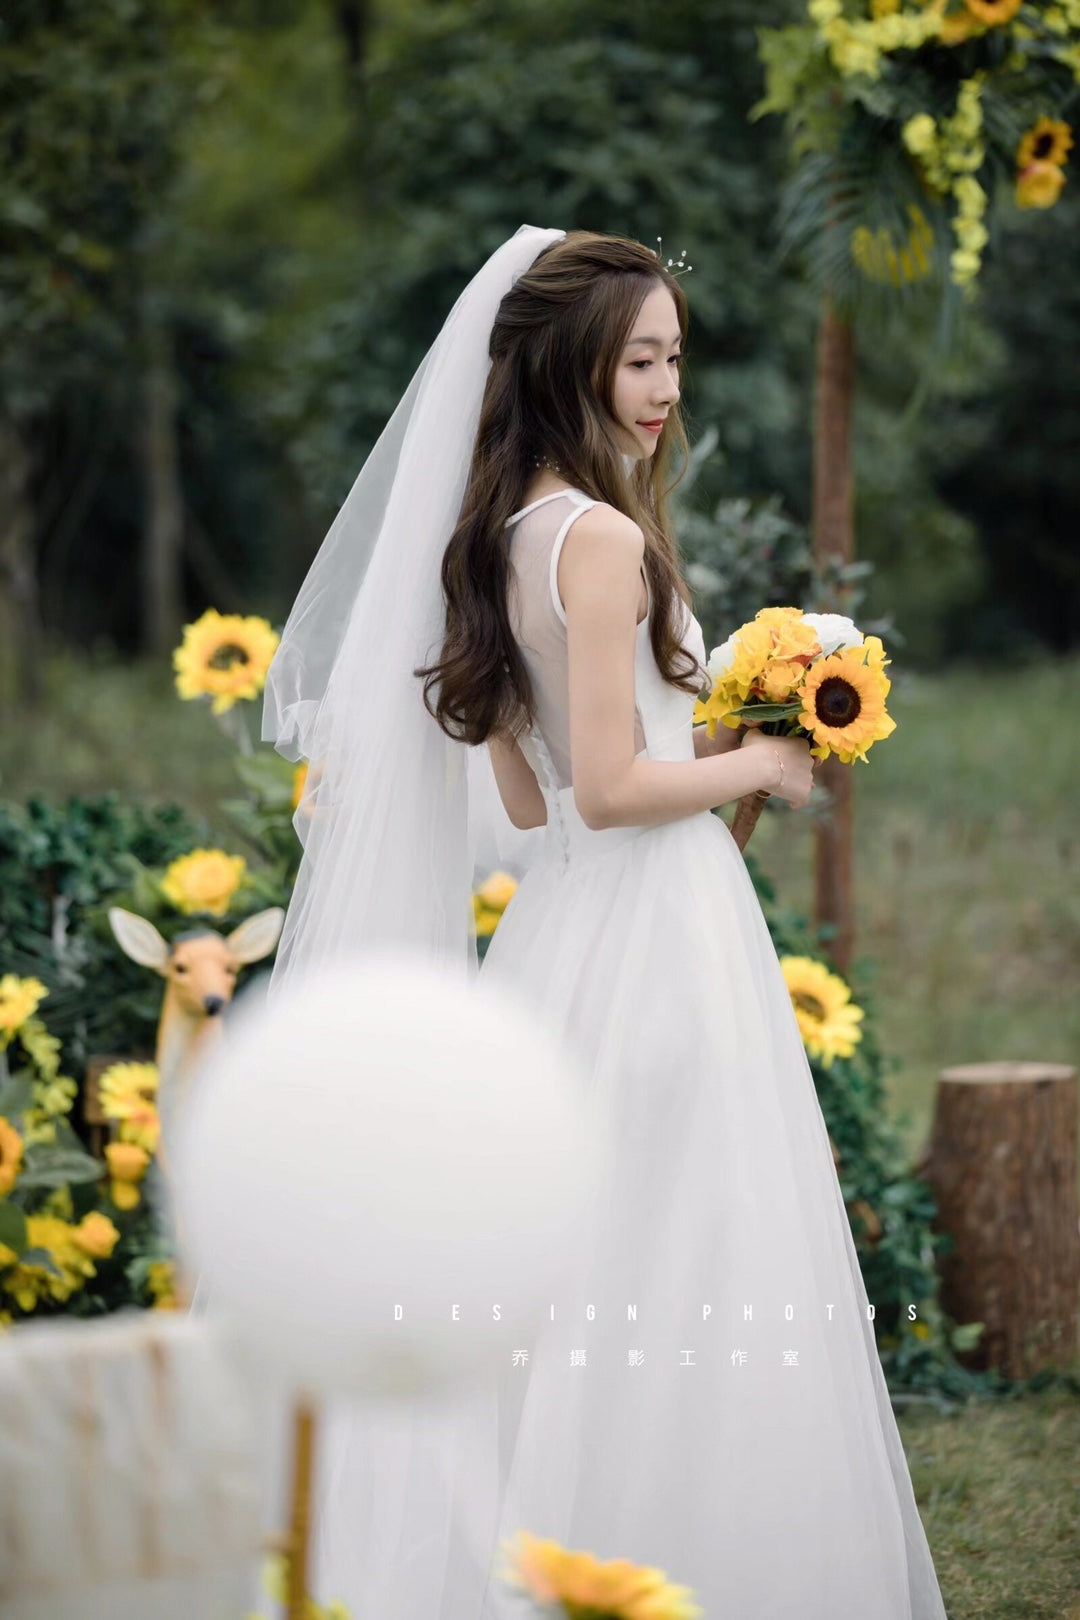 Fairy pure simple simple light wedding dress simple travel shoot real outdoor lawn wedding out of the dress light yarn wedding dress.